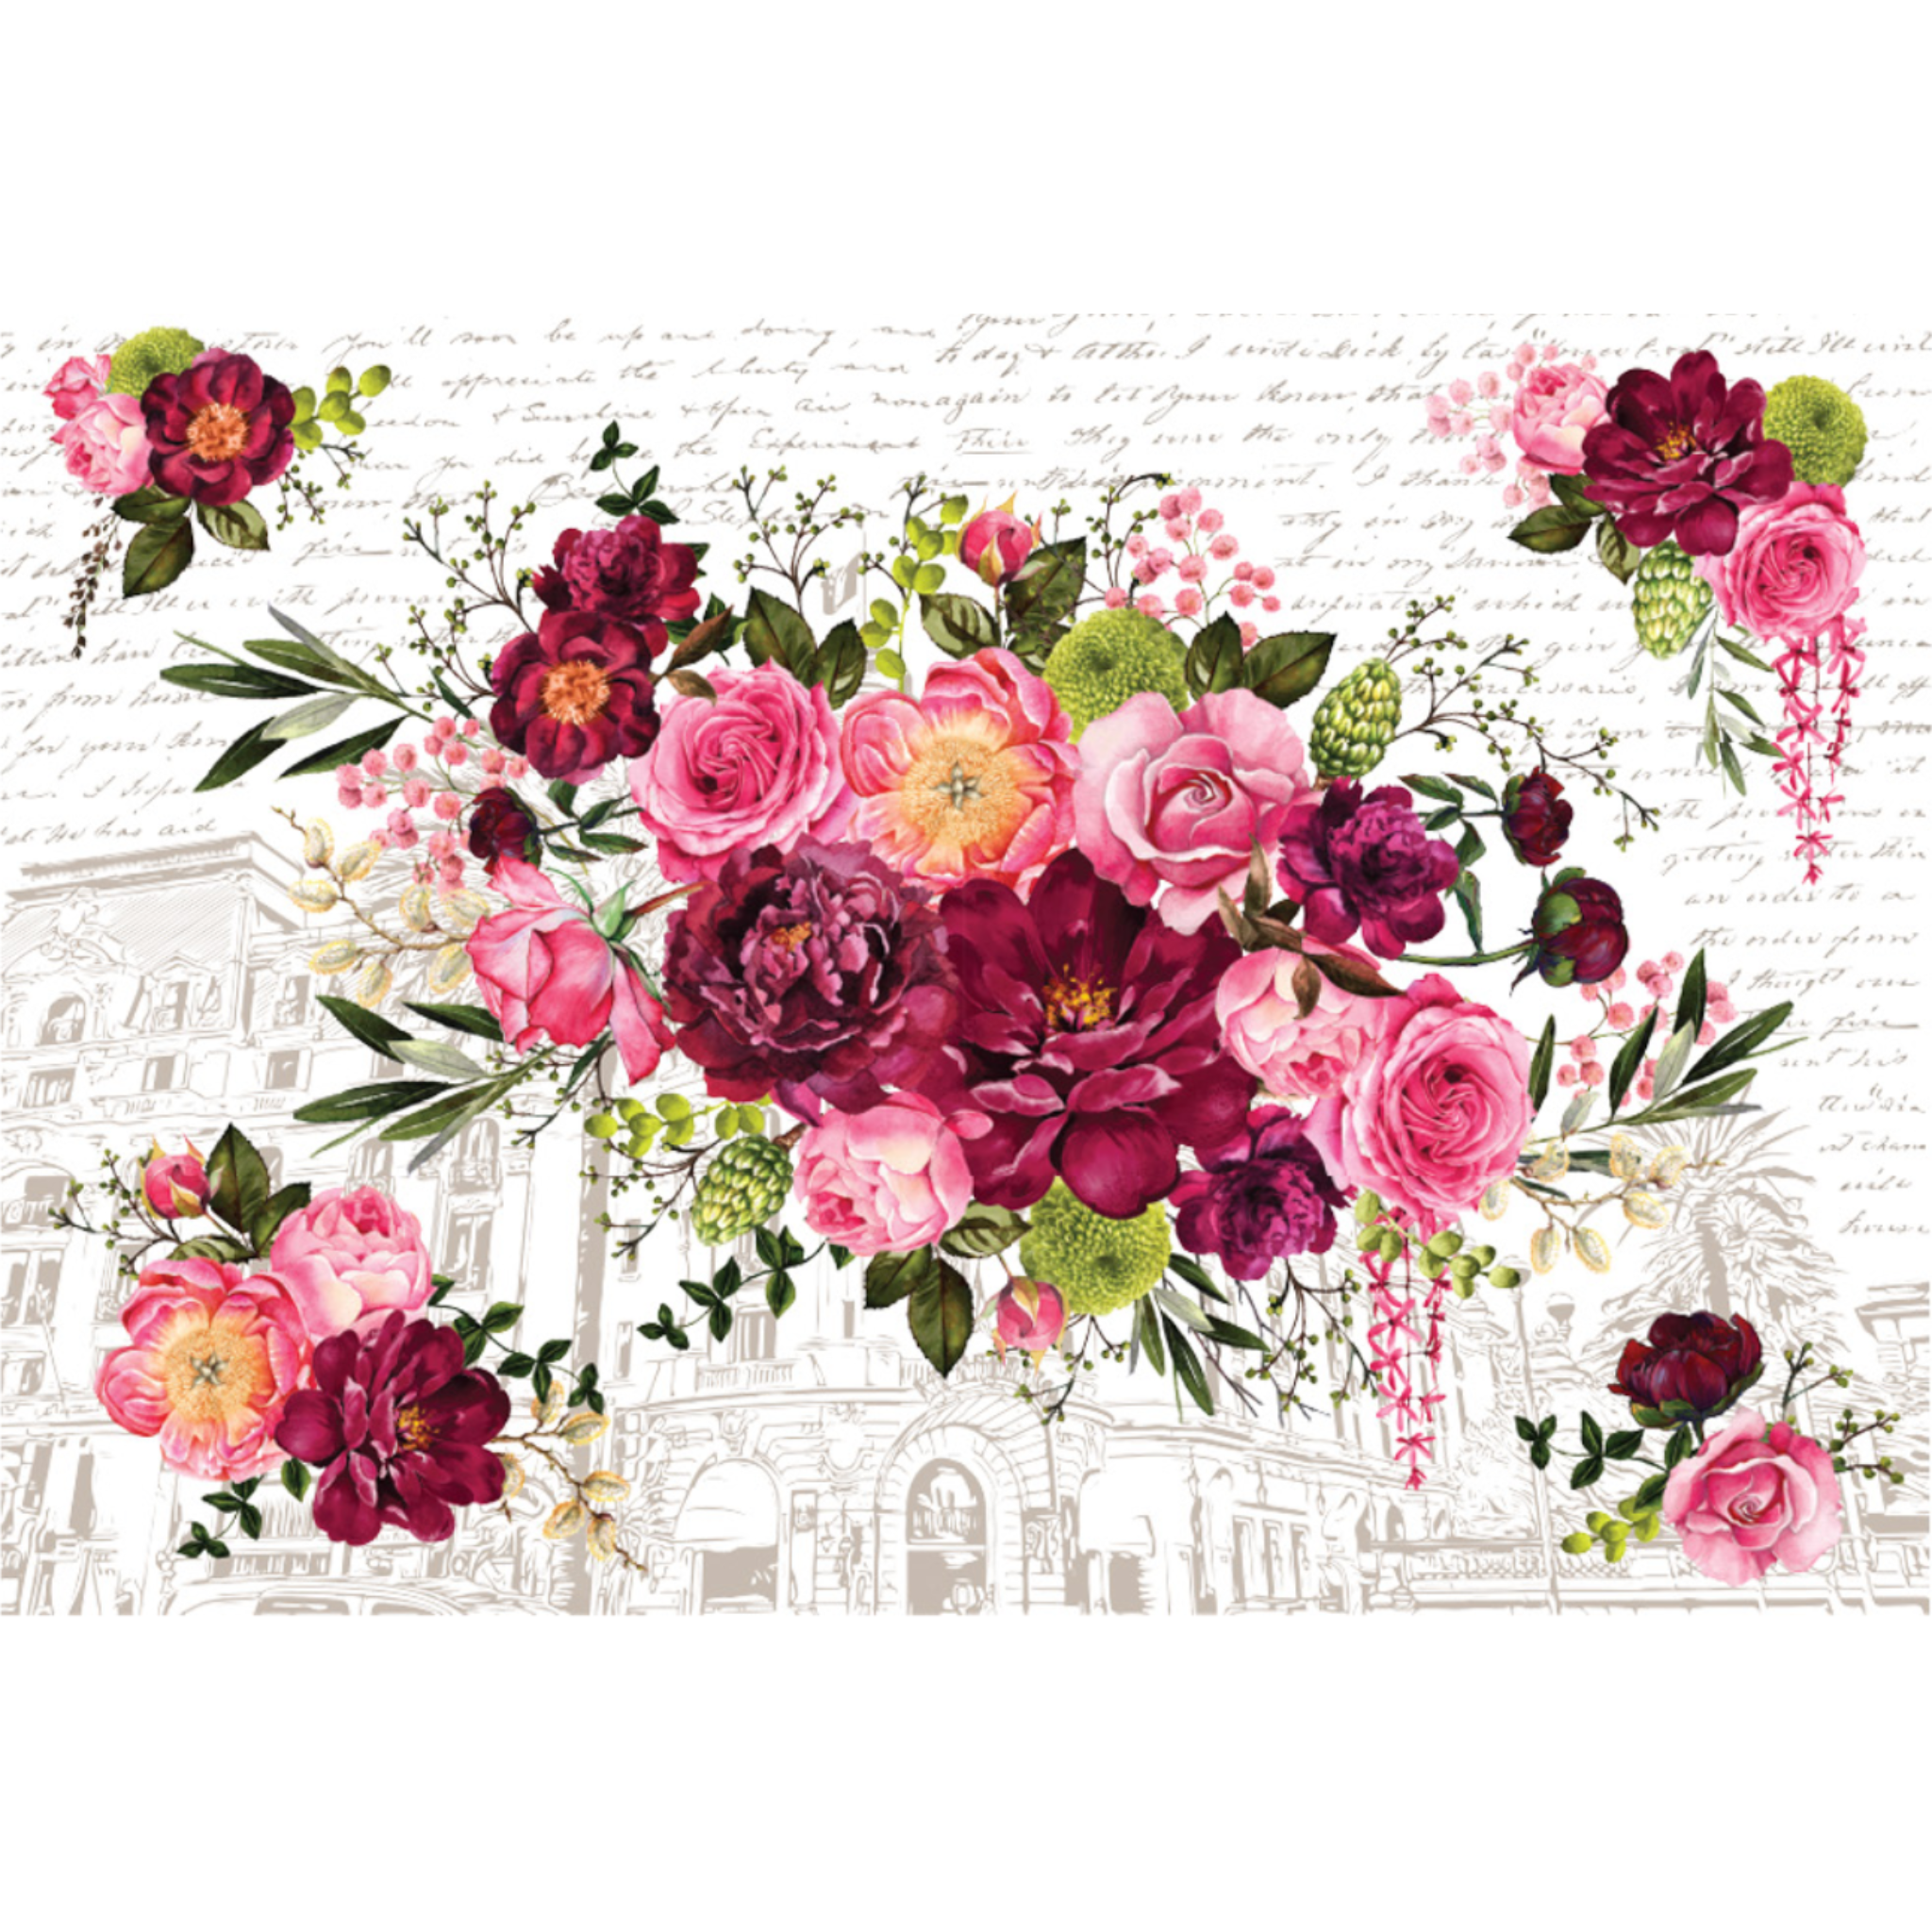 Rub-on transfer design that features a luscious combination of burgundy and pink roses on a stunning architectural background.